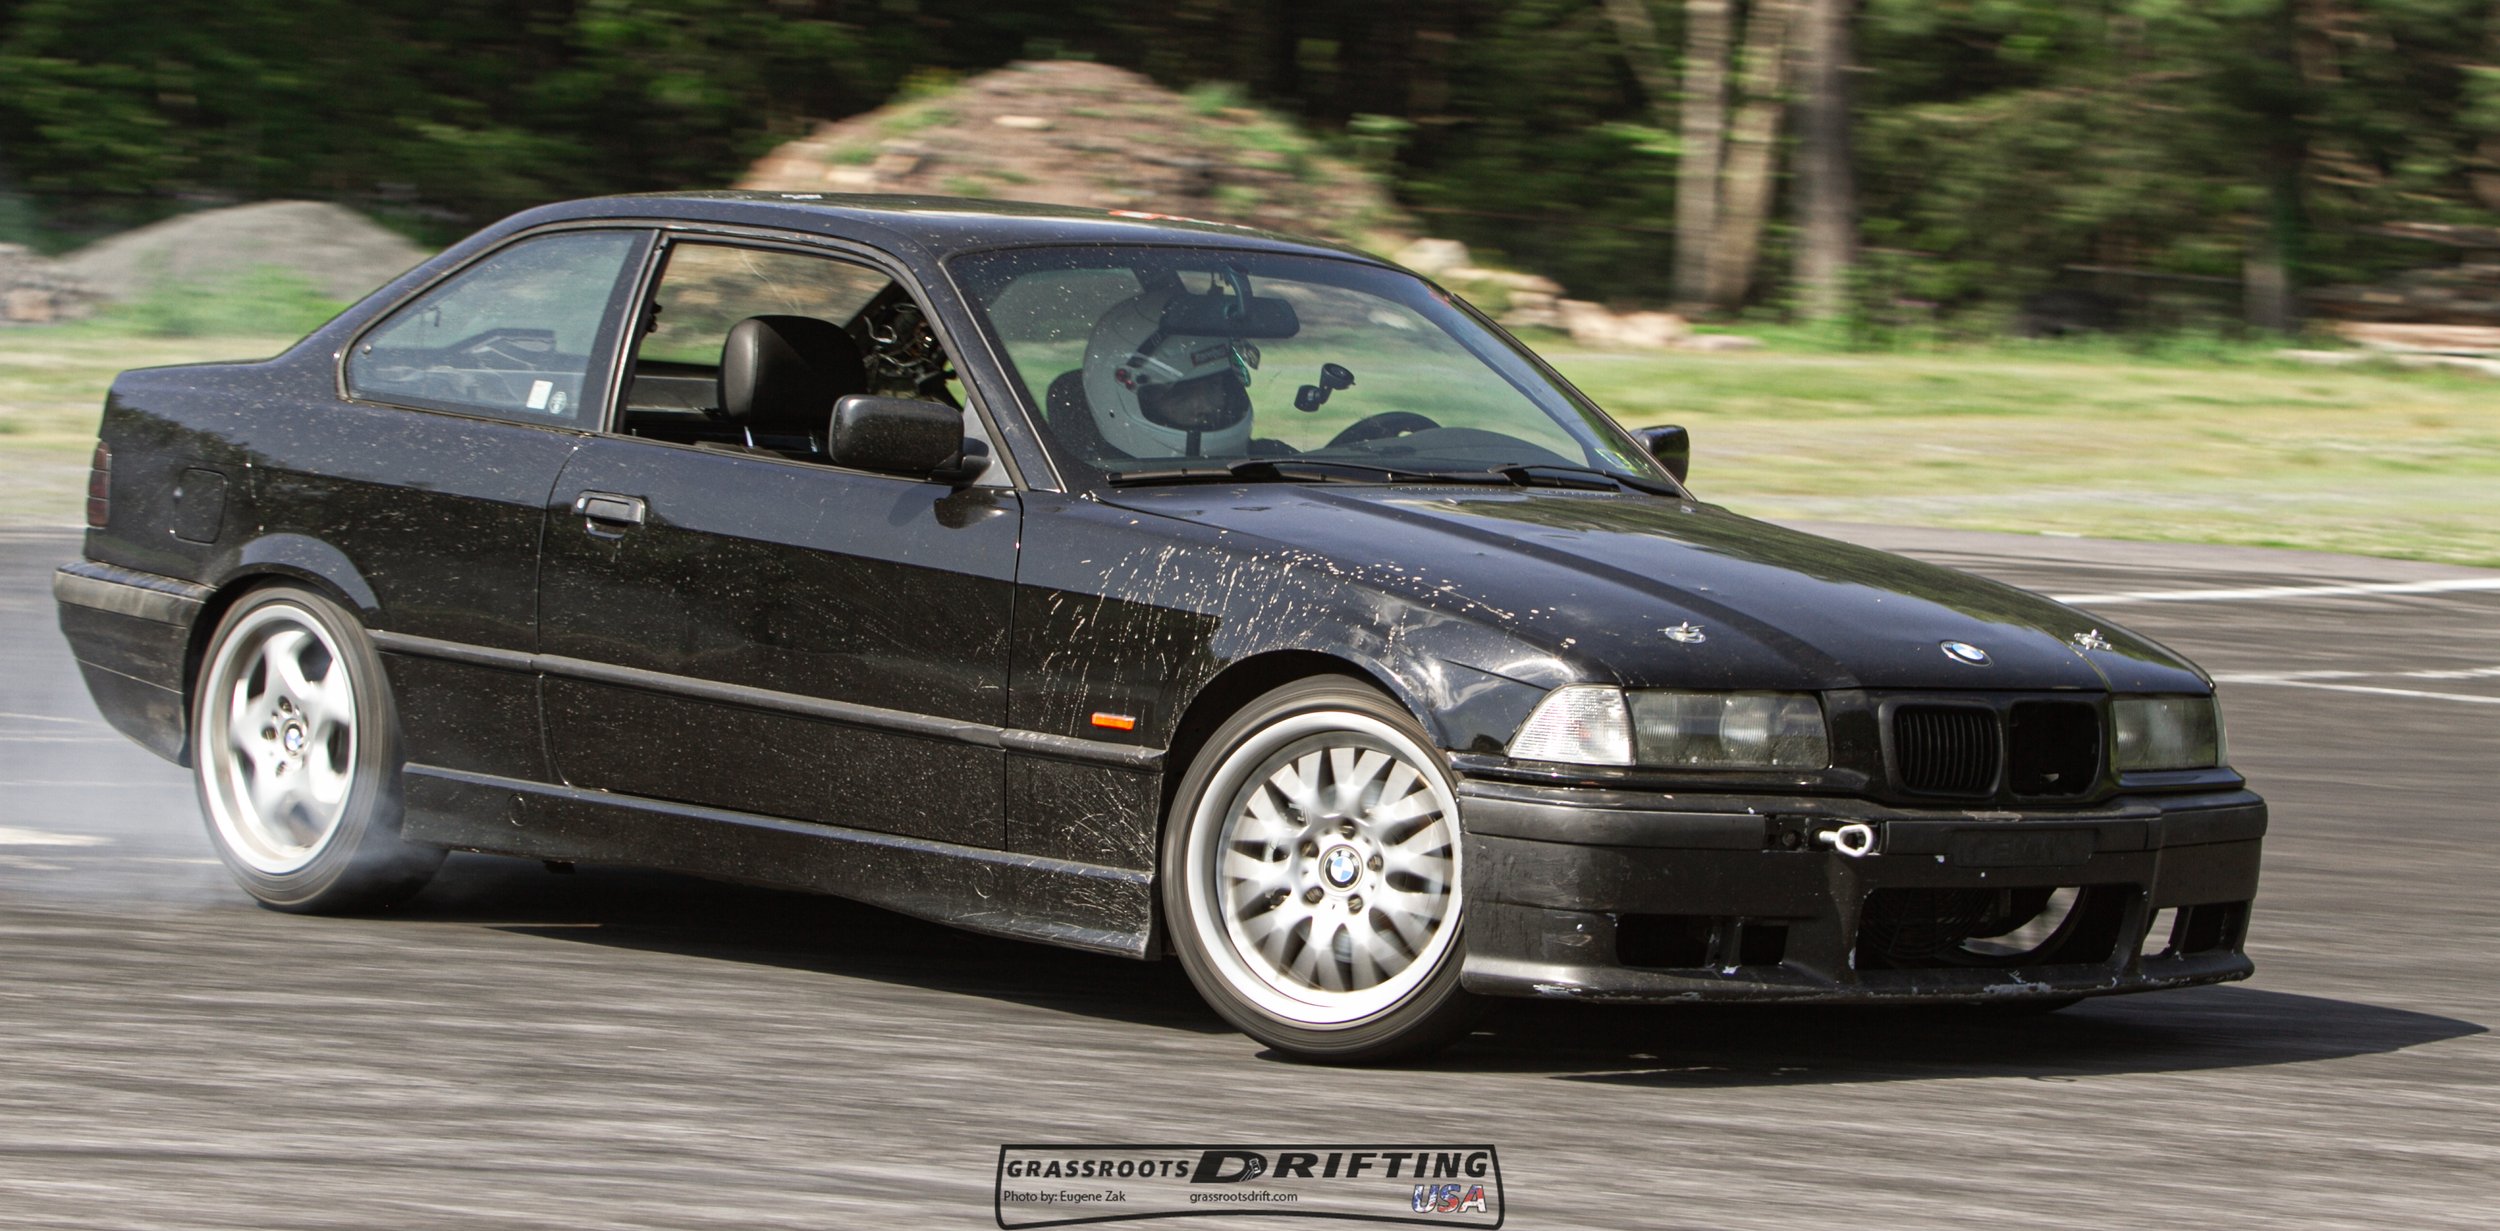 10 Cheapest Drift Cars That Are Perfect For Beginners